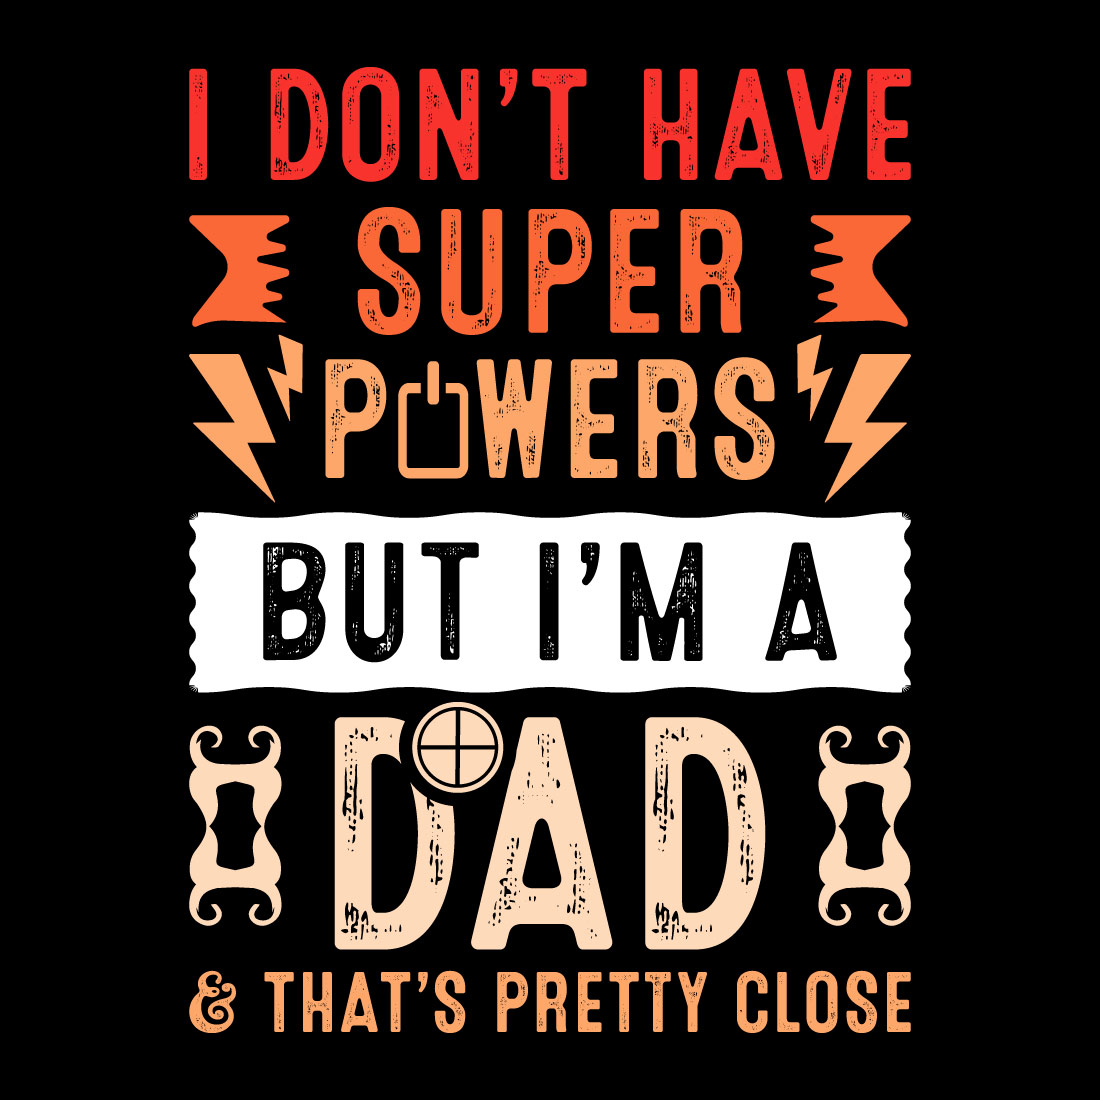 fathers day t shirt dad t shirt design father day tshirt happy fathers day t shirt design ideas dad day papa son fathers day shirt ideas for family 5 347